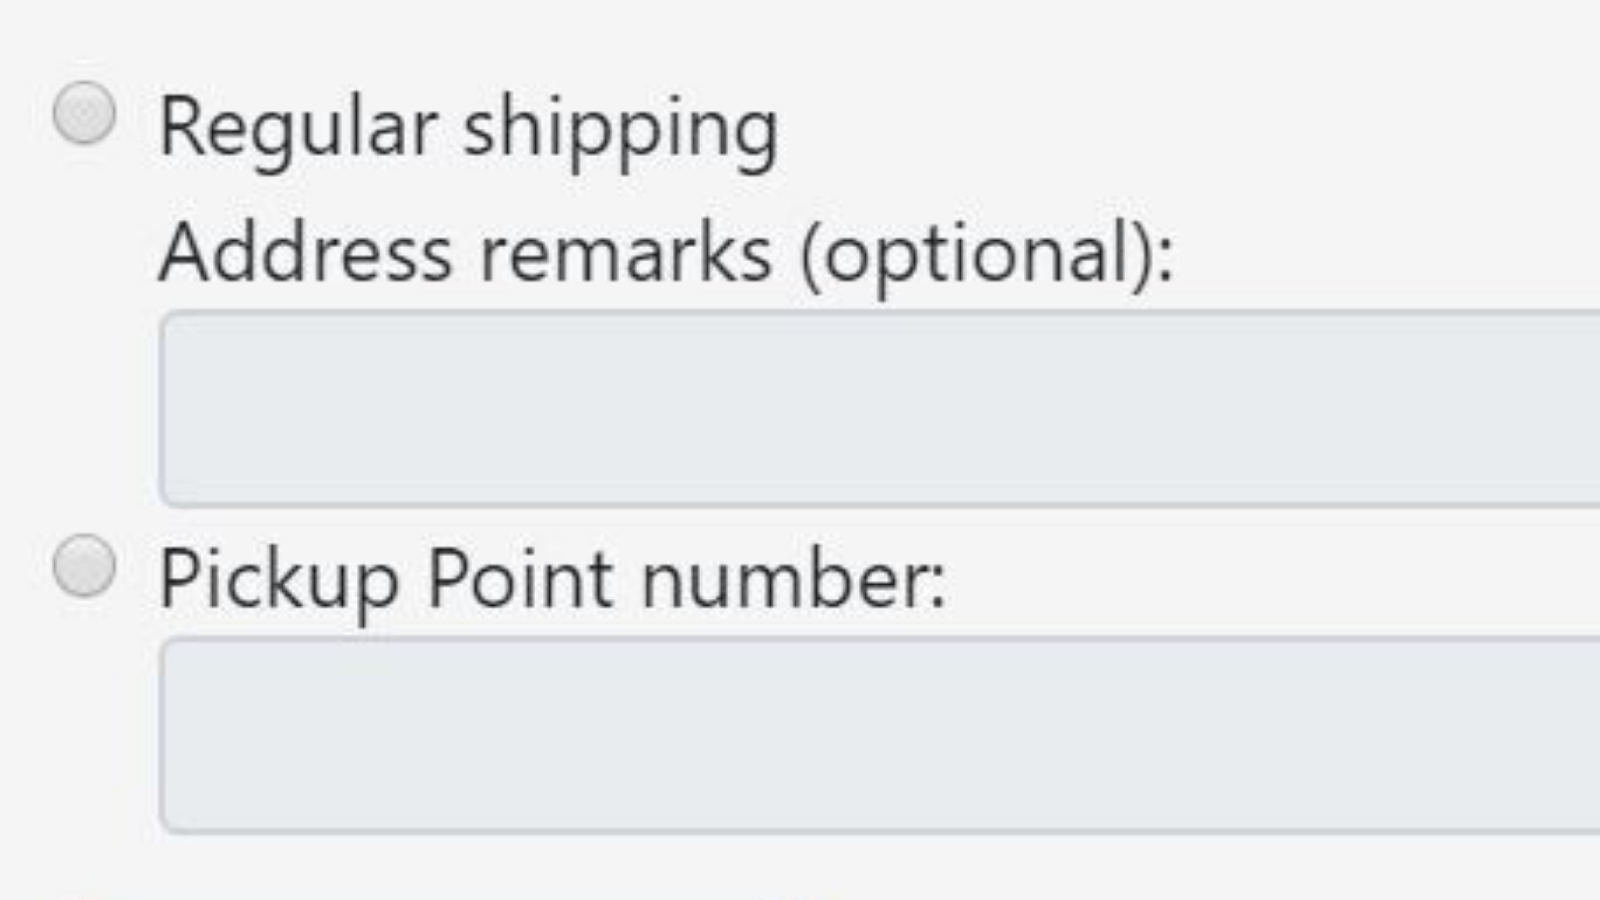 Select between regular shipping and pickup point delivery